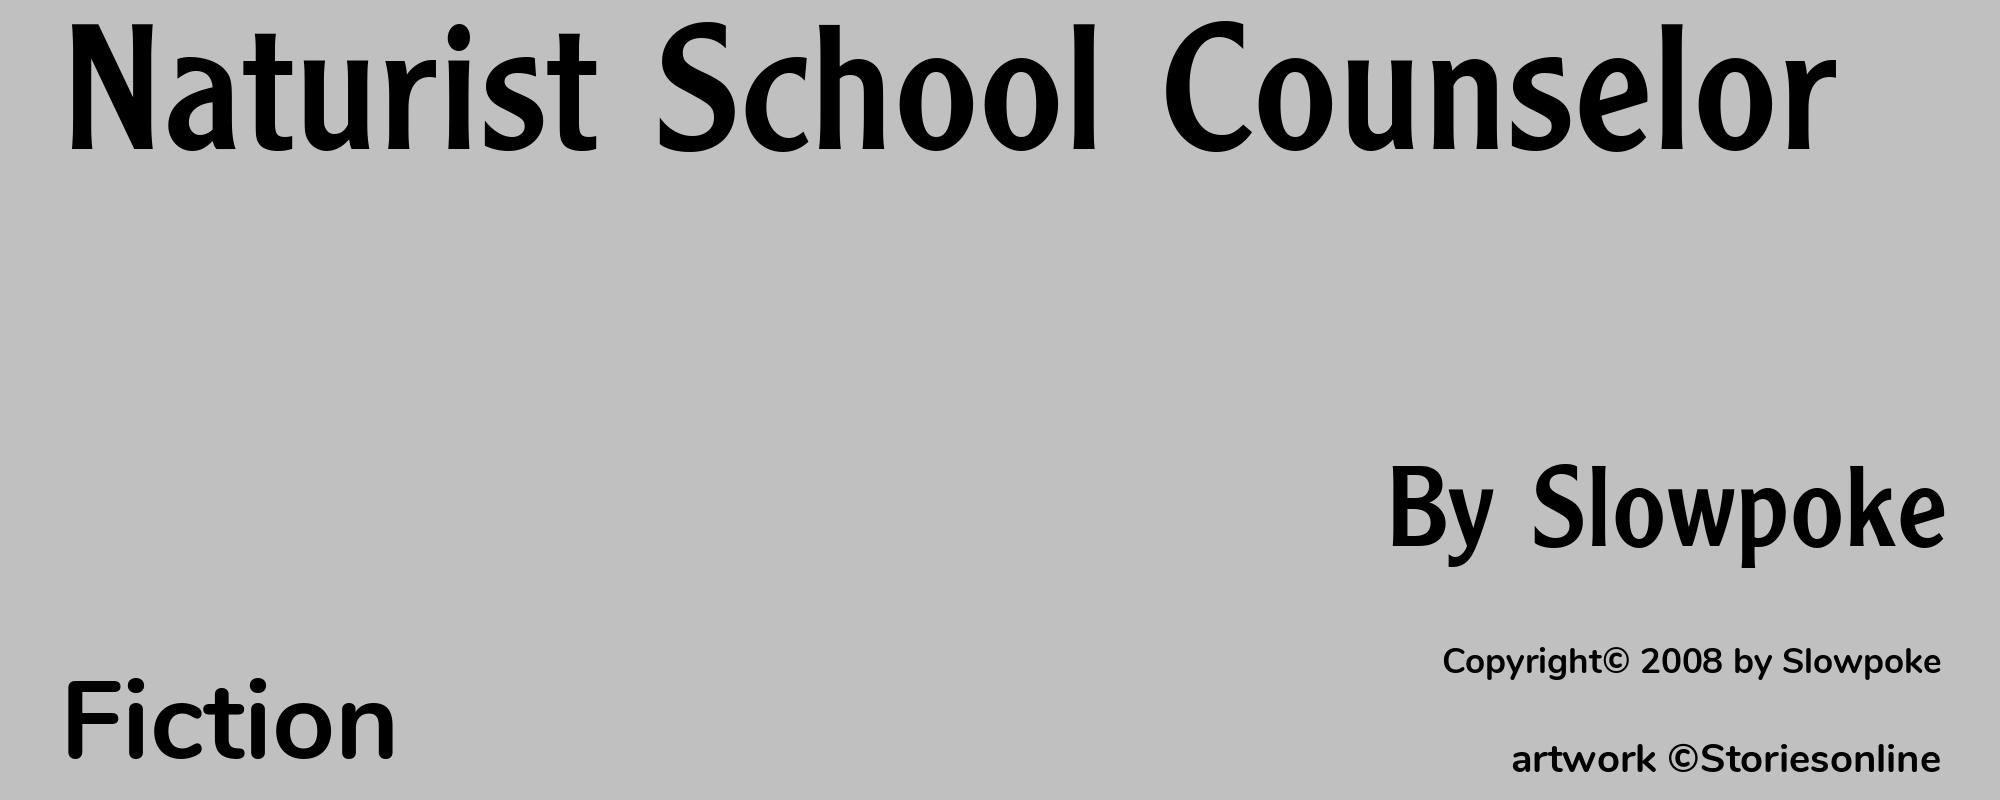 Naturist School Counselor - Cover